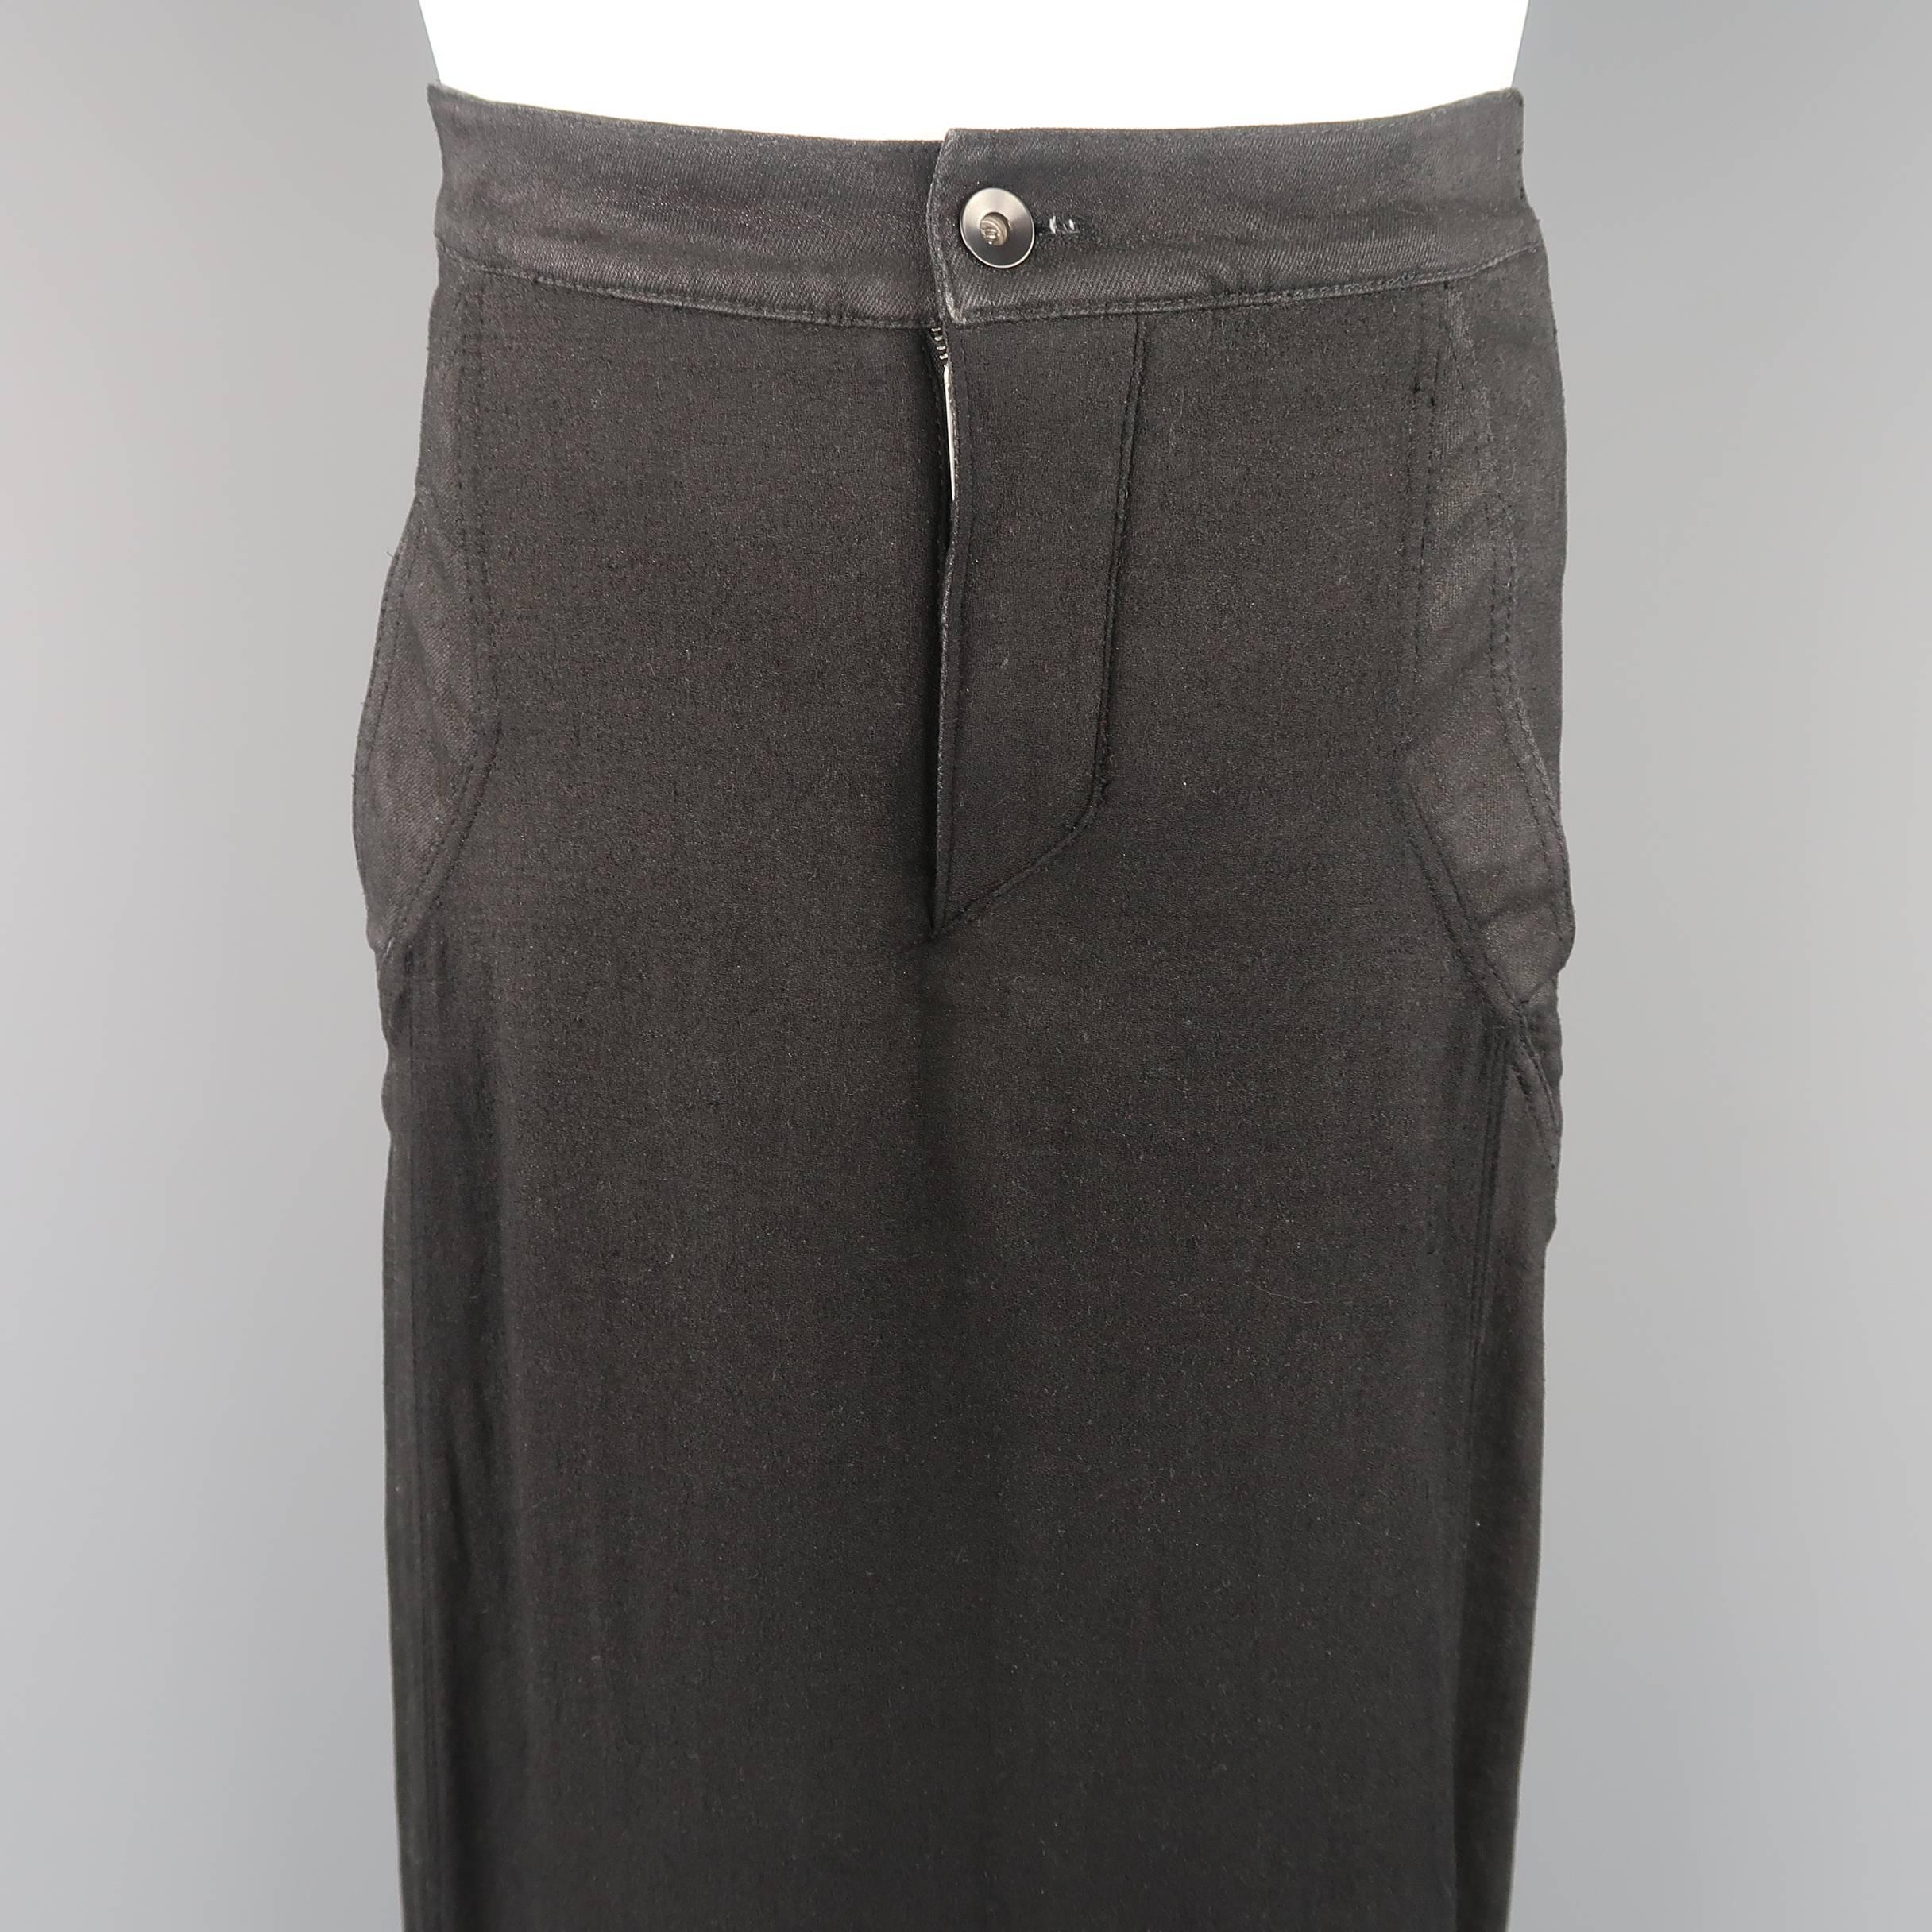 GARETH PUGH pants feature dark gray skinny jeans with stretch panels and wool blend knit skirt overlays. Made in Italy.
 
Good Pre-Owned Condition.
Marked: IT 48
 
Measurements:
 
Waist: 30 in.
Rise: 9 in.
Inseam: 32 in.
